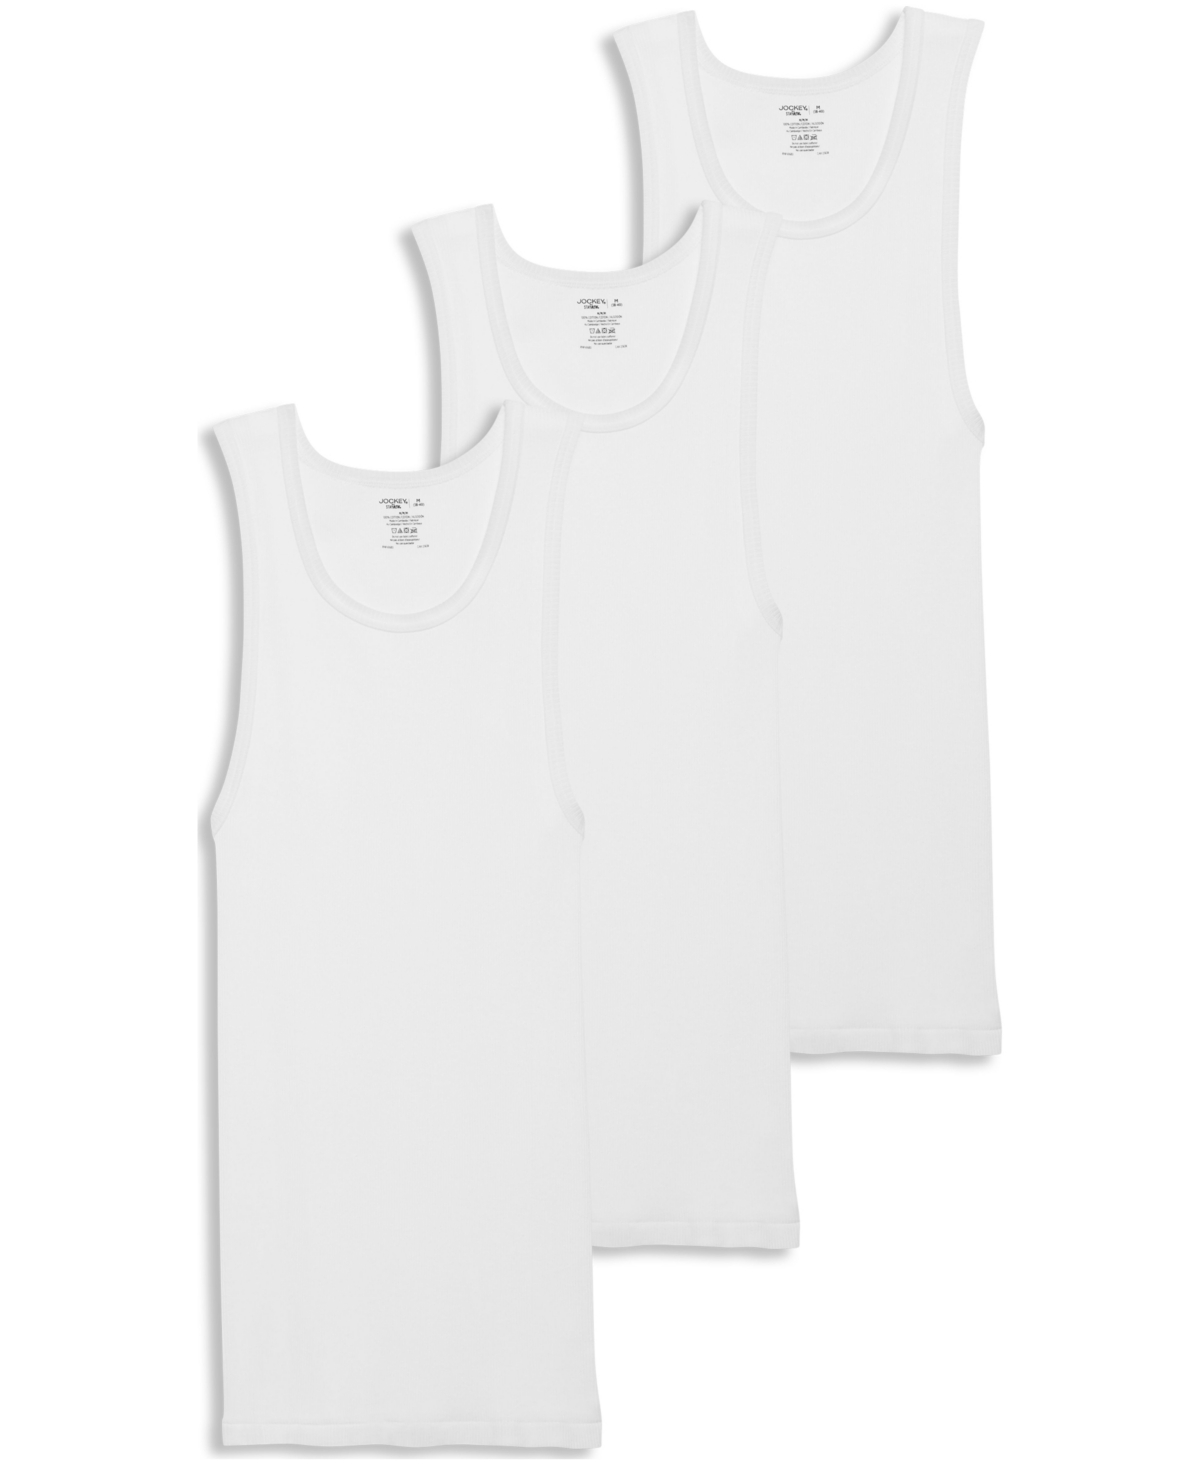 Men's Cotton A-shirt Tank Top, Pack of 3 - White